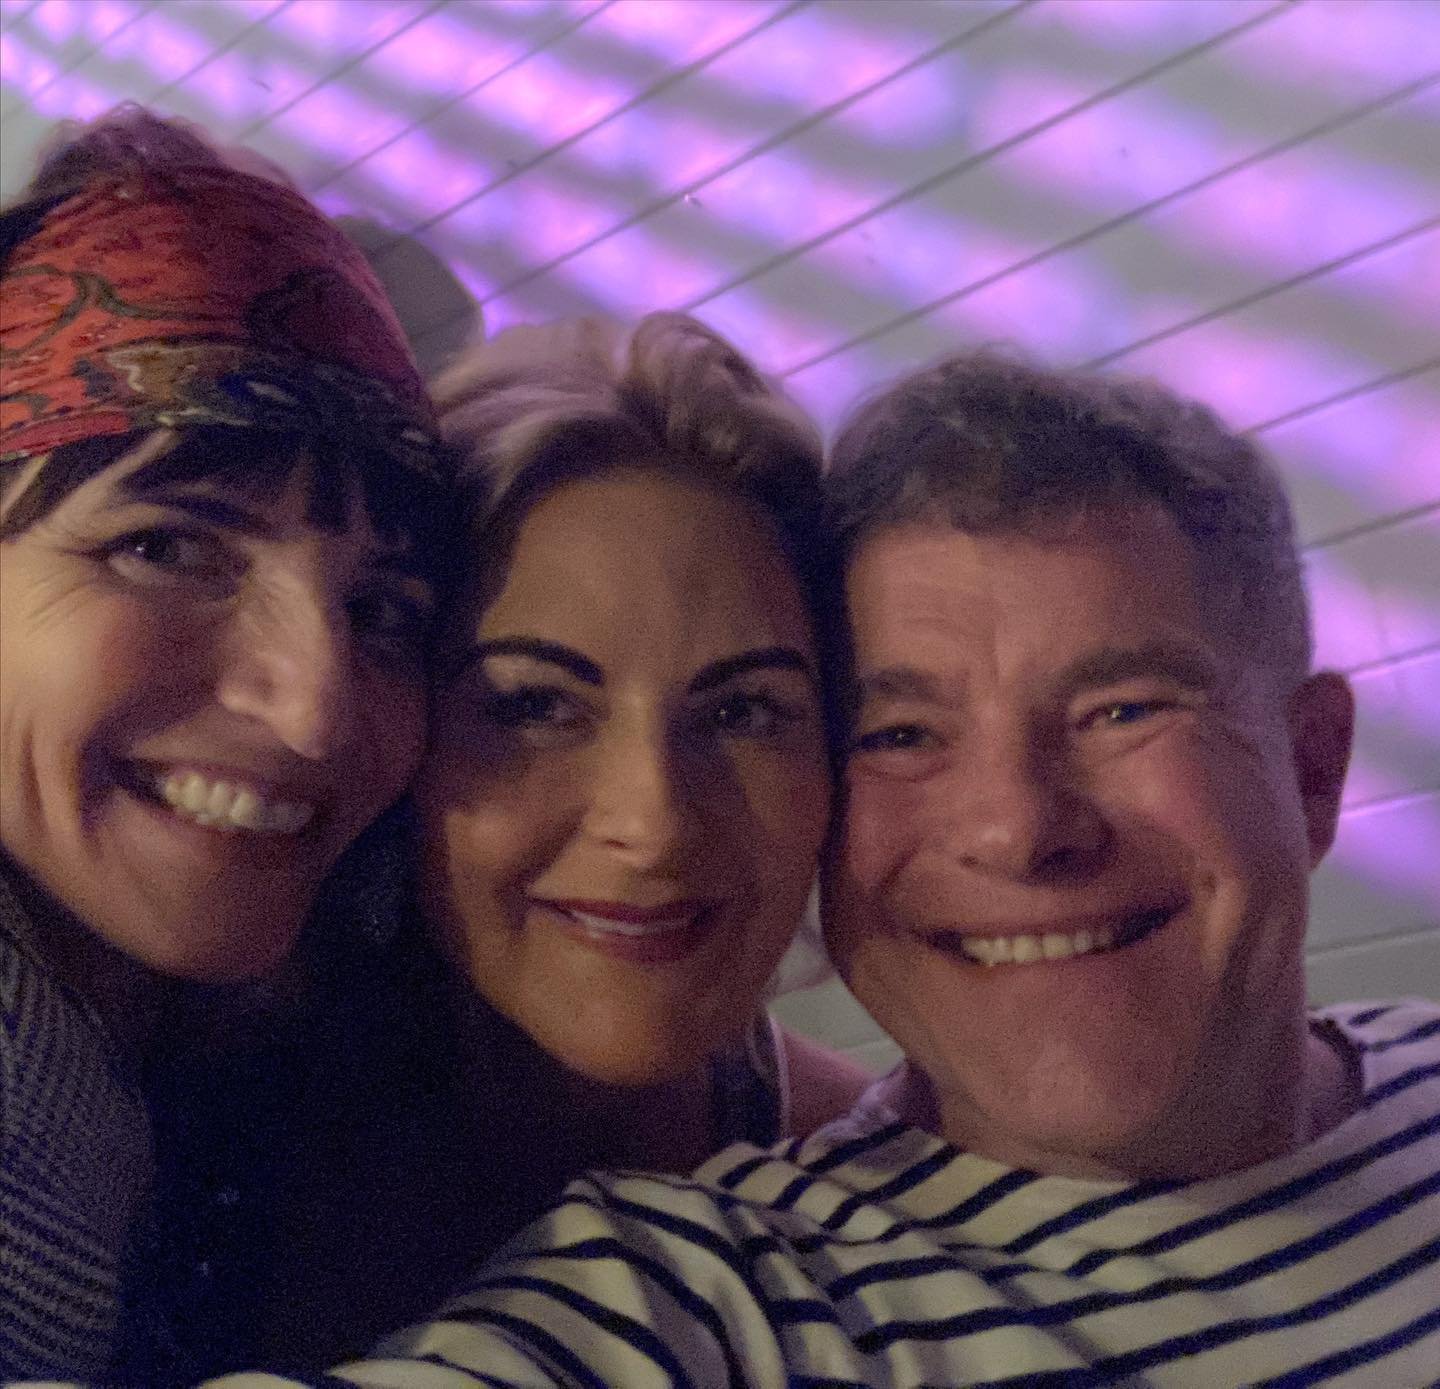 All for one and one for all! The Three Musketeers&hellip; ear to ear&hellip; larging it up after all these years! 

Happy birthday to our dear friend @cazhanson with love from @peppermaryanne @dimainstone and @mainstonepress . Thanks for a magical ev